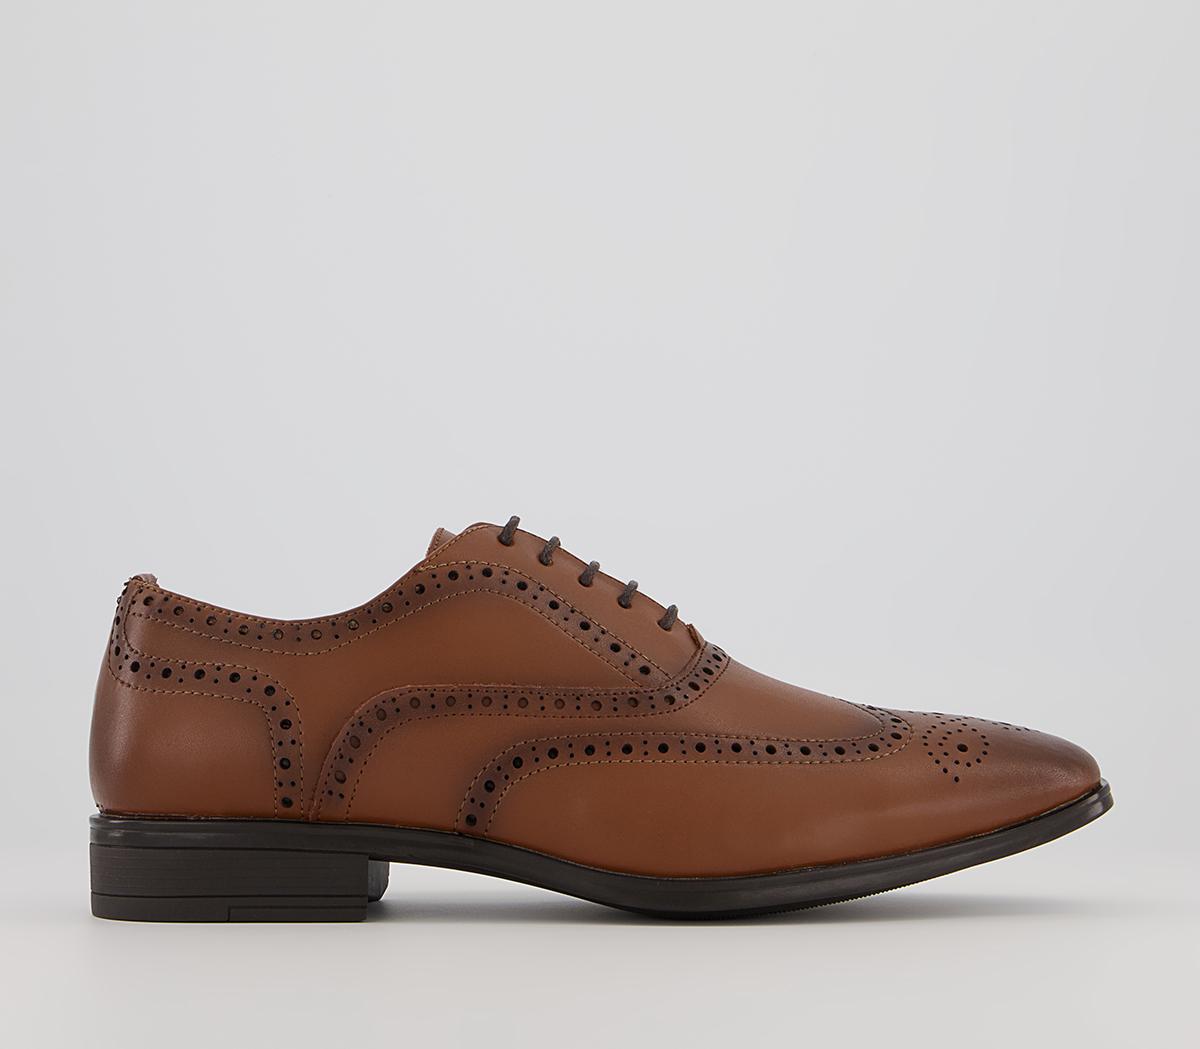 OfficeMacro 2 Oxford BroguesTan Leather